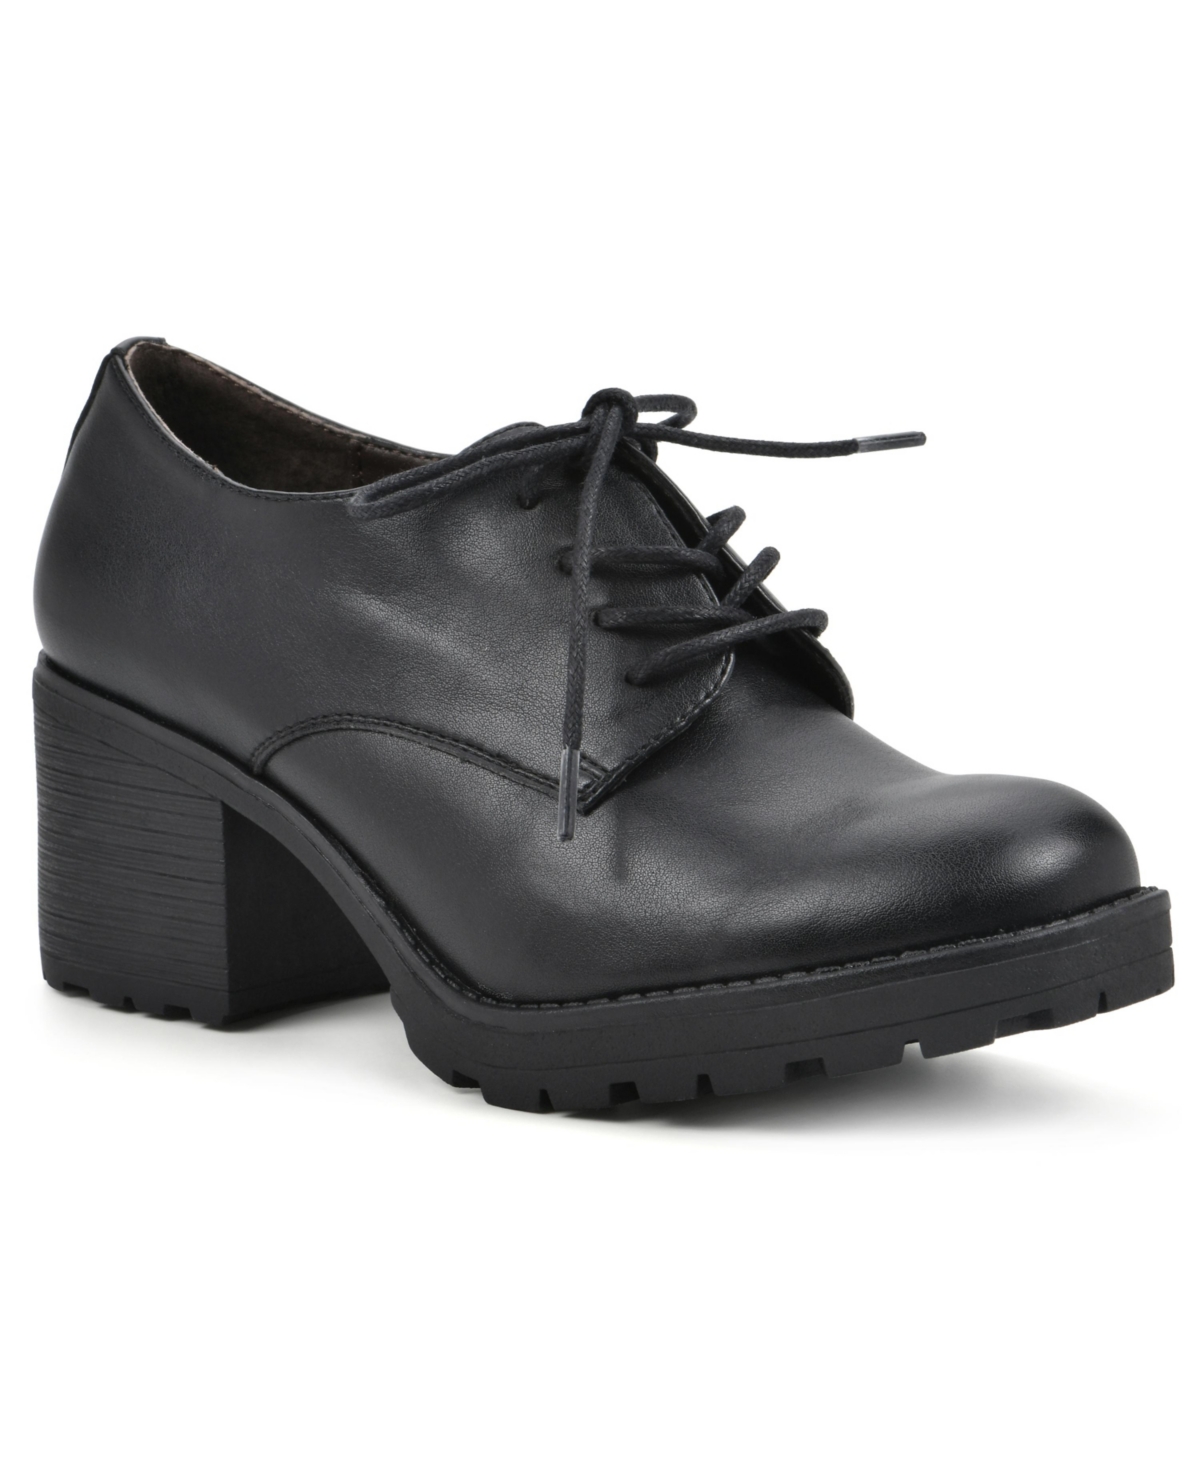 Women's Bourbons Heeled Oxford Loafers - Black Smooth